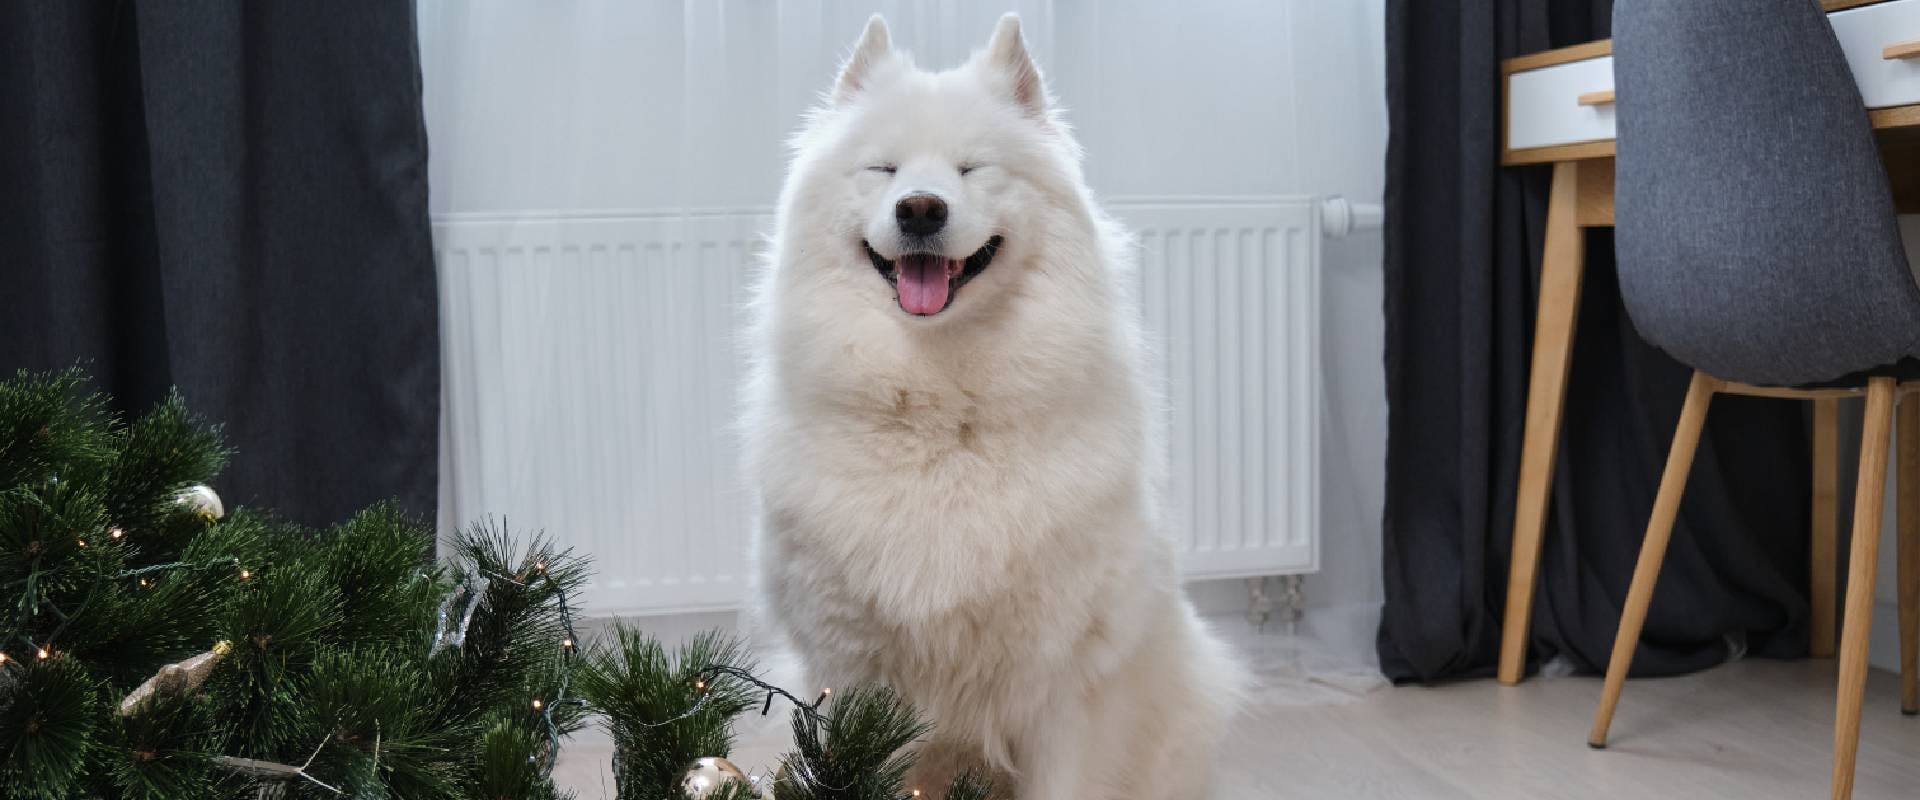 Fluffy white puppy next to a knocked-over Christmas tree